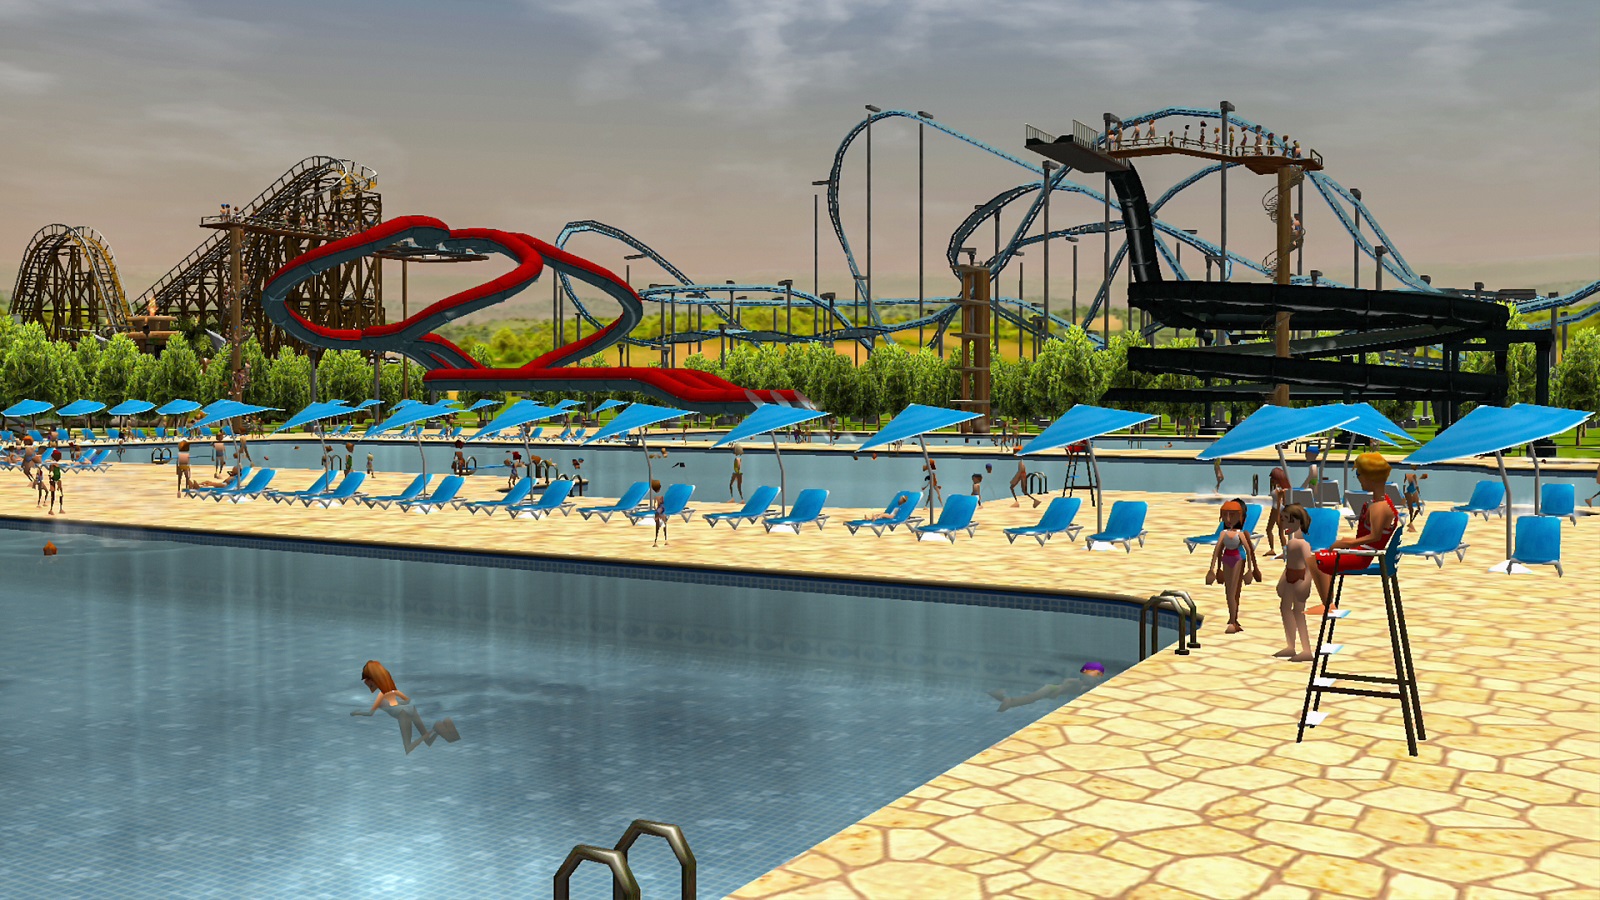 It’s time to get soaked and wild as RollerCoaster Tycoon 3: Complete